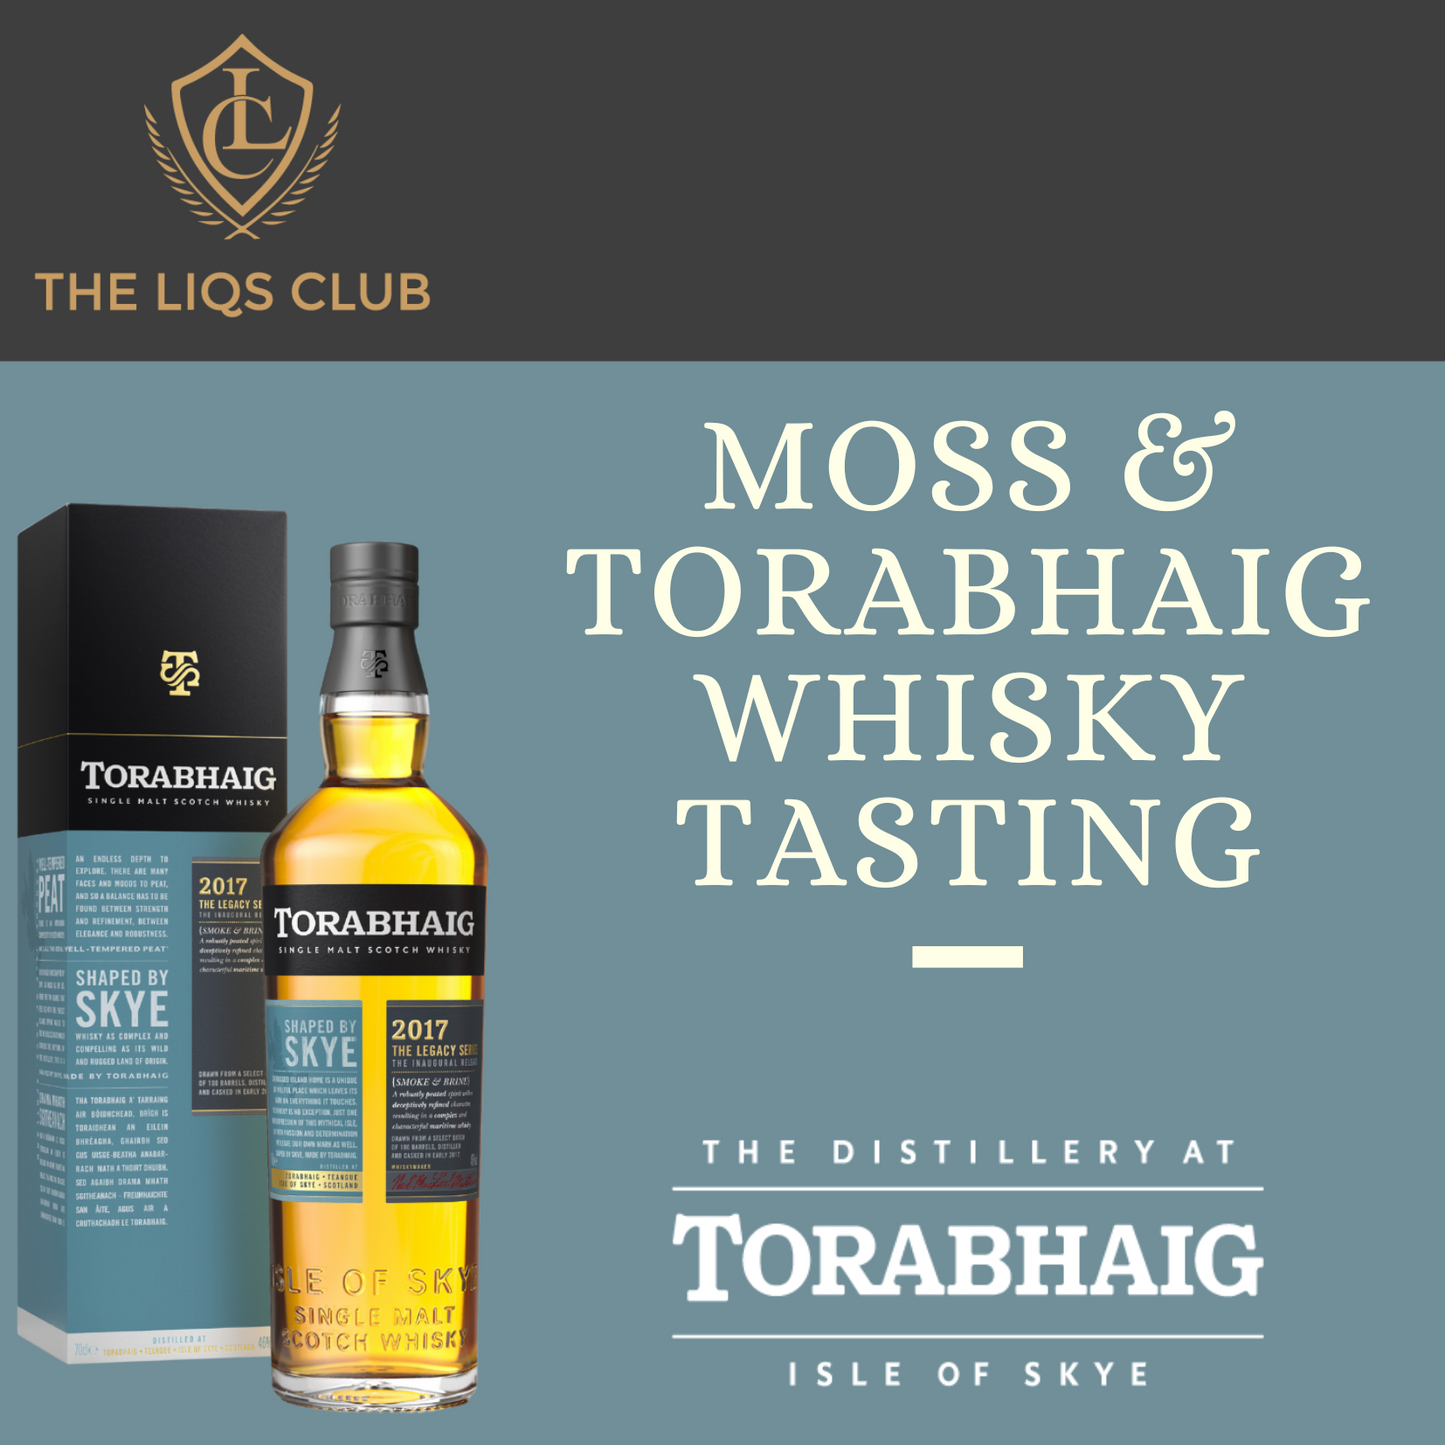 Moss & Torabhaig Whisky Tasting - Friday 8th March 2024 7.30pm